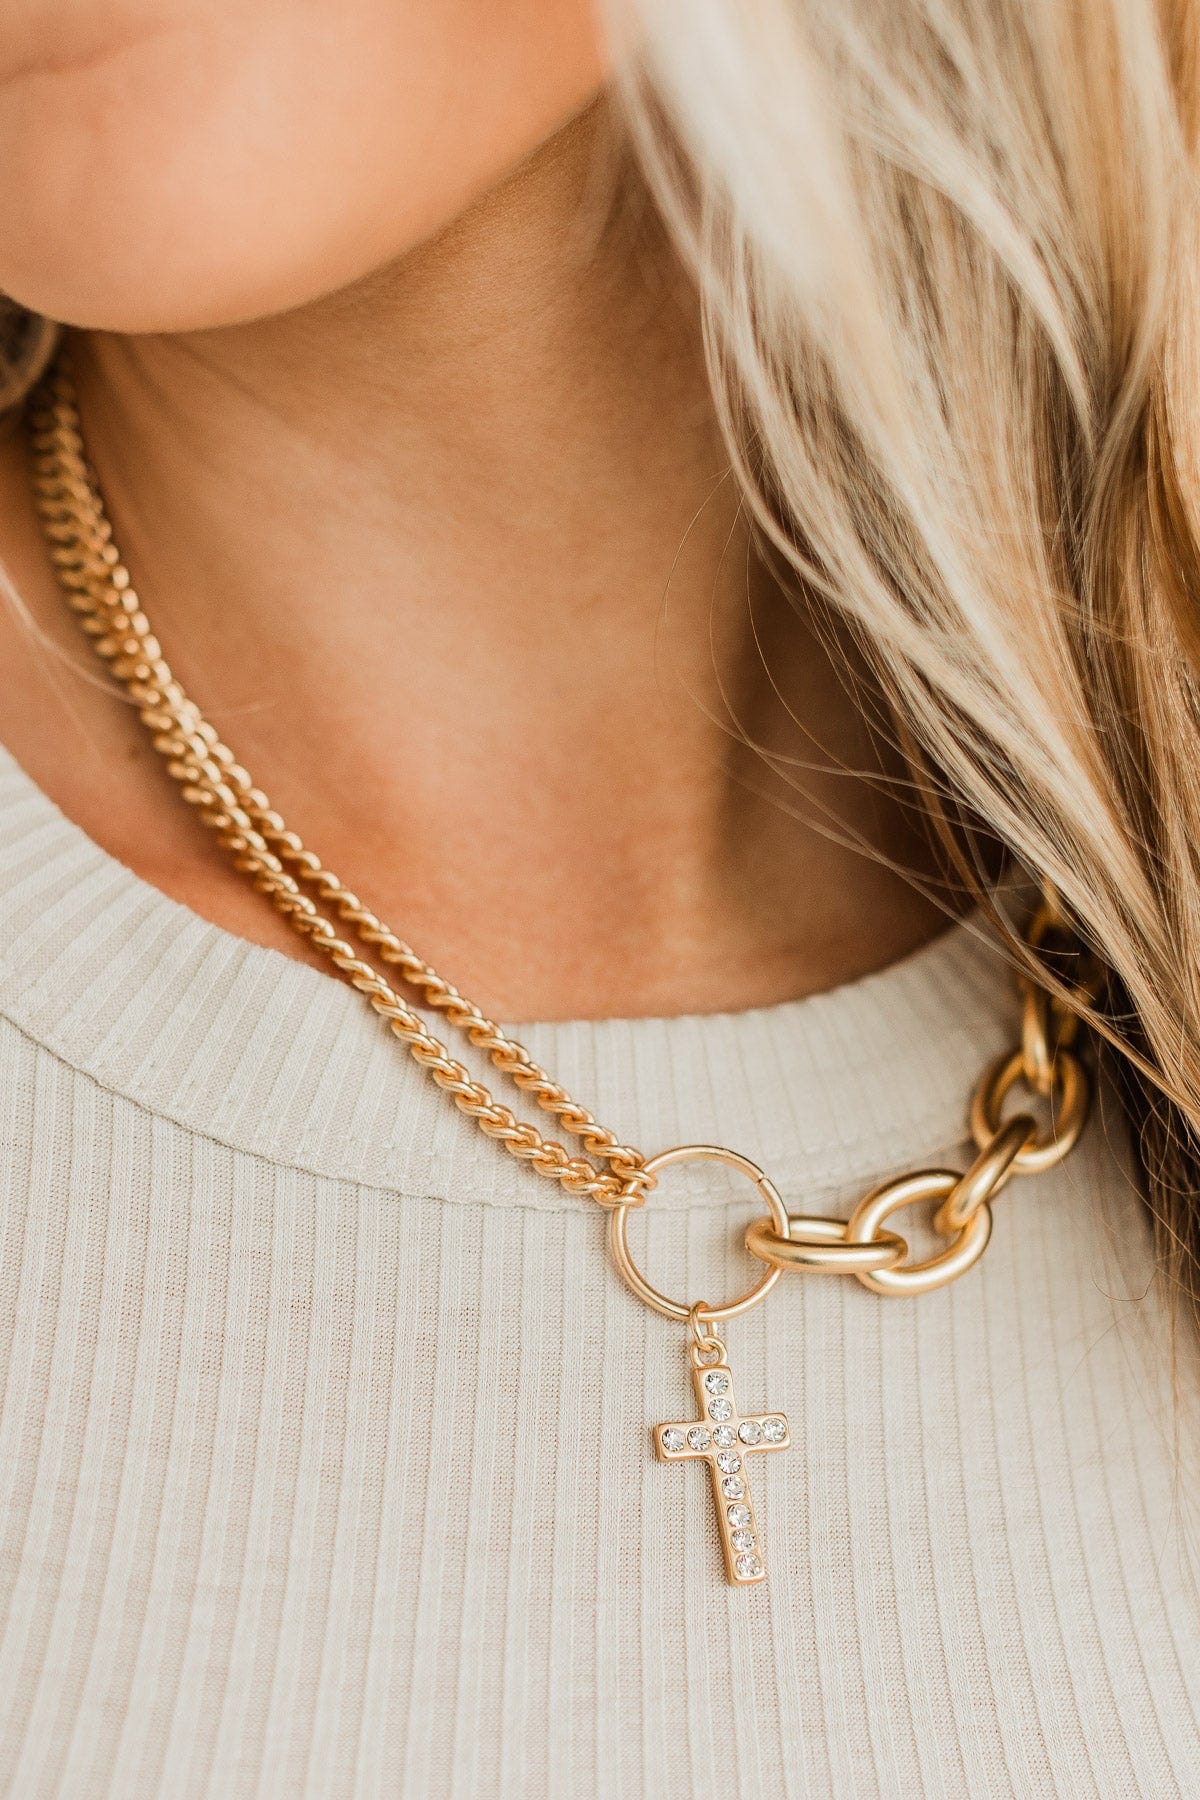 Chasing Charm Cross Necklace- Gold